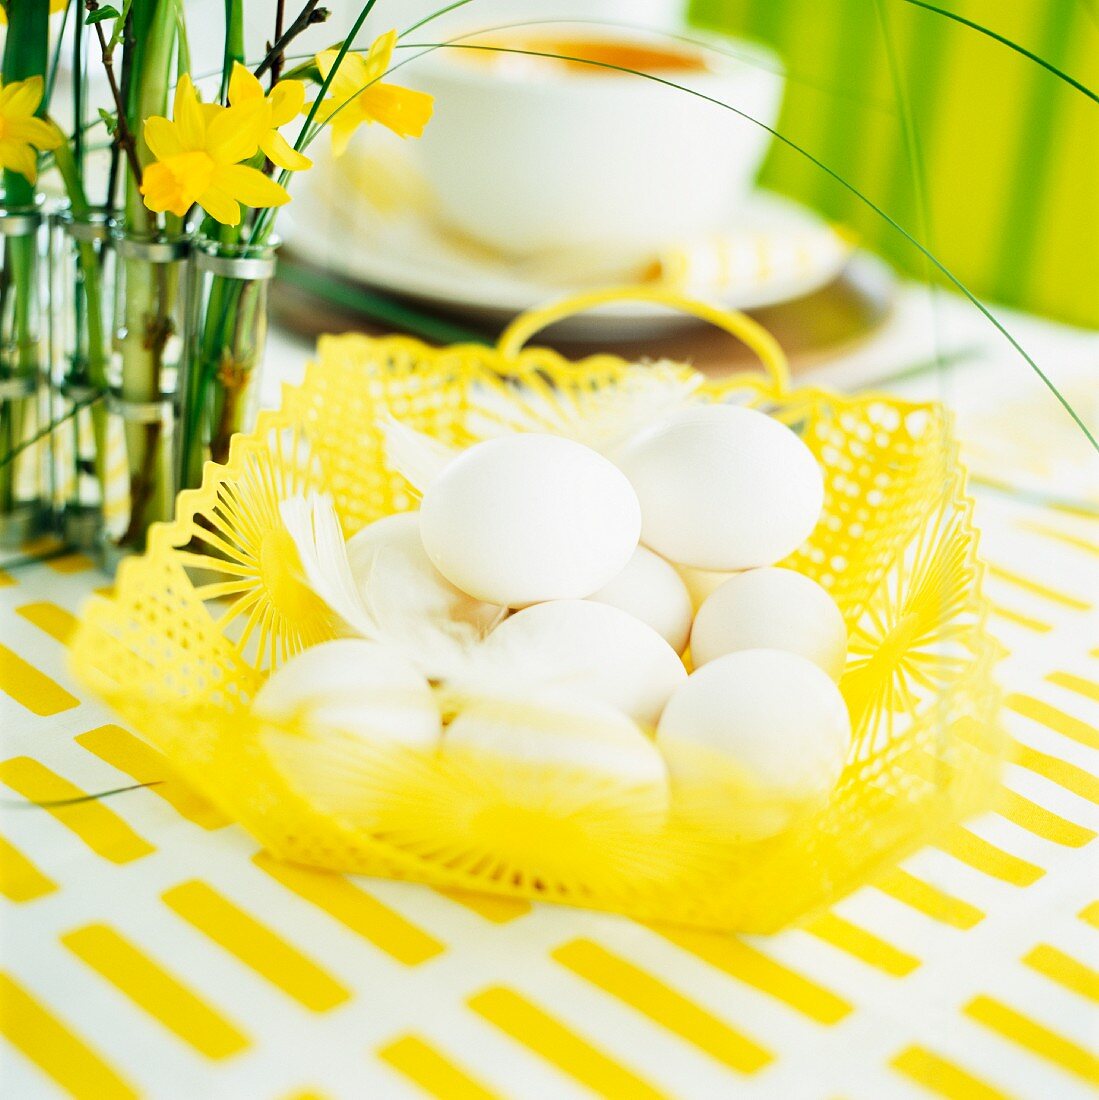 A table laid for Easter decorated with a basket of eggs and daffodils